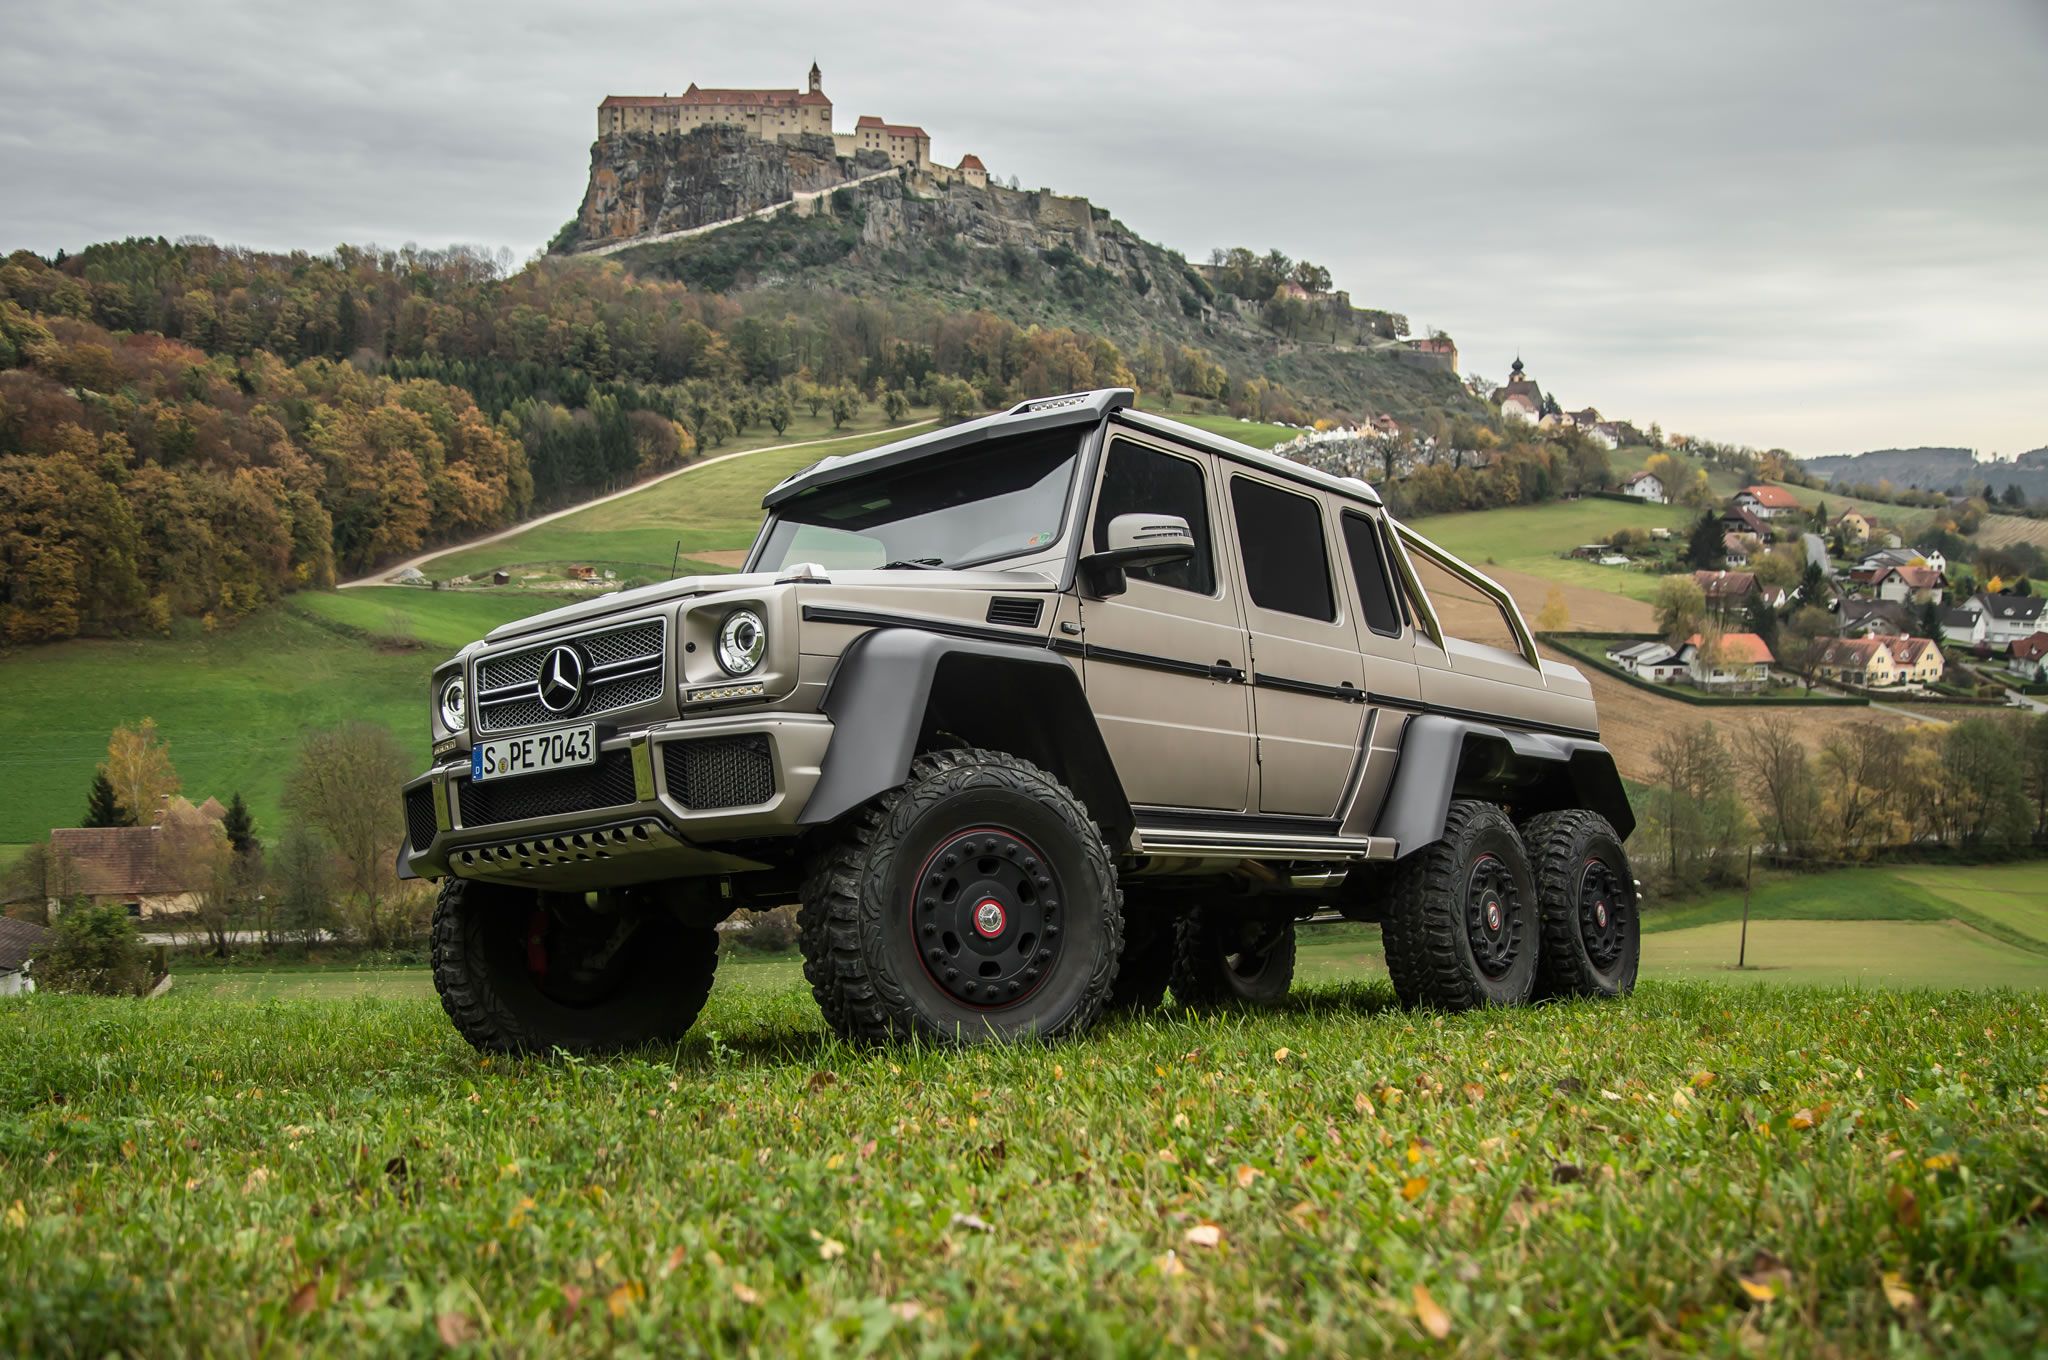 Mercedes Benz G63 AMG 6x6 Plate, Front View, Monastery In Background